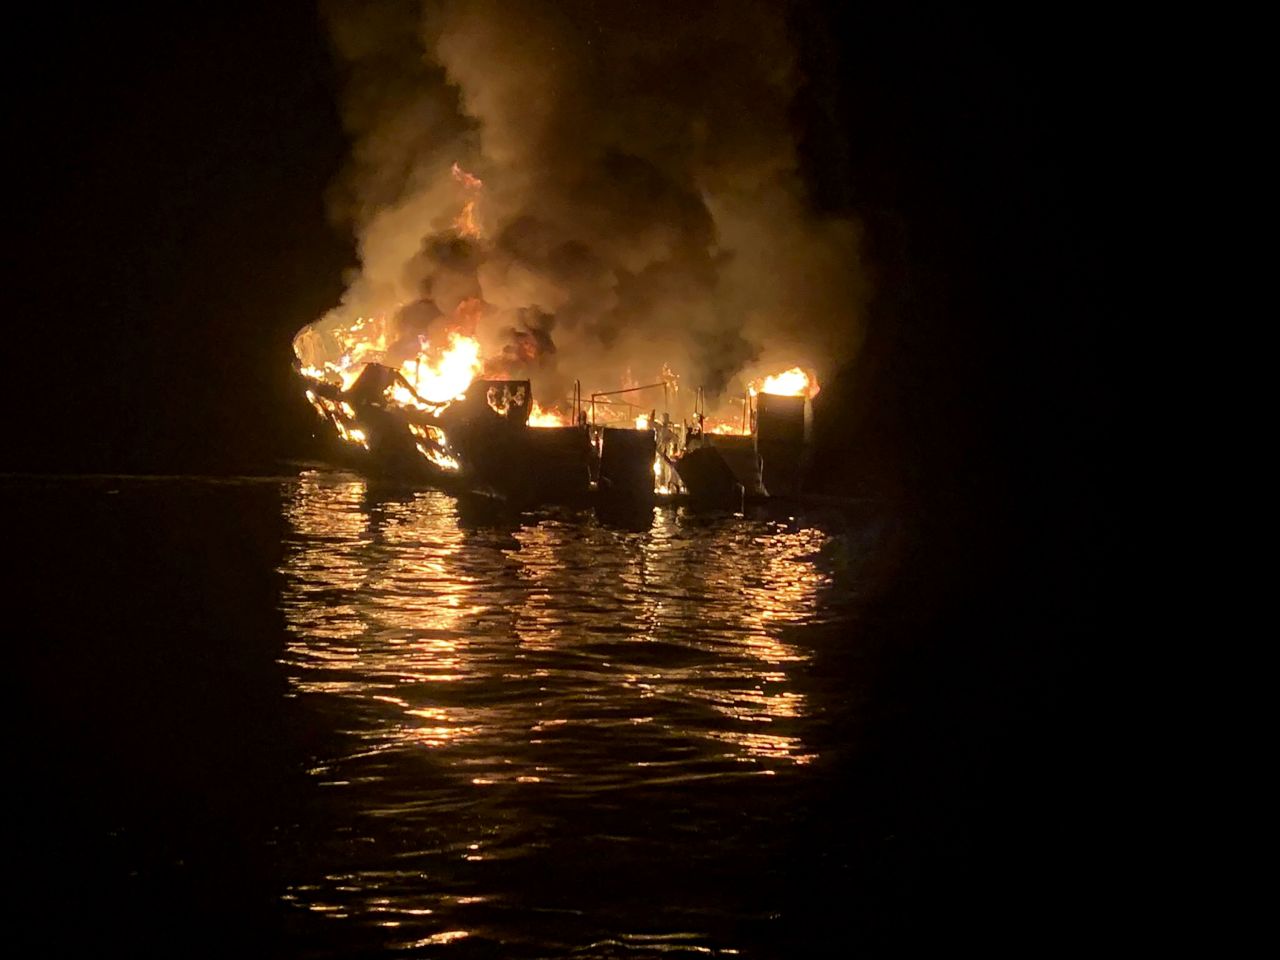 In this photo provided by the Santa Barbara County Fire Department in California, a deadly fire engulfs <a href="https://www.cnn.com/2019/09/02/us/california-boat-fire-rescue/index.html" target="_blank">The Conception</a>, a 75-foot scuba diving vessel, off the coast of Southern California in the Channel Islands National Park on Monday, September 2. Of the <a href="https://www.cnn.com/2019/09/03/us/california-dive-boat-who-was-on-board/index.html" target="_blank">39 people aboard</a>, only five people were found alive.